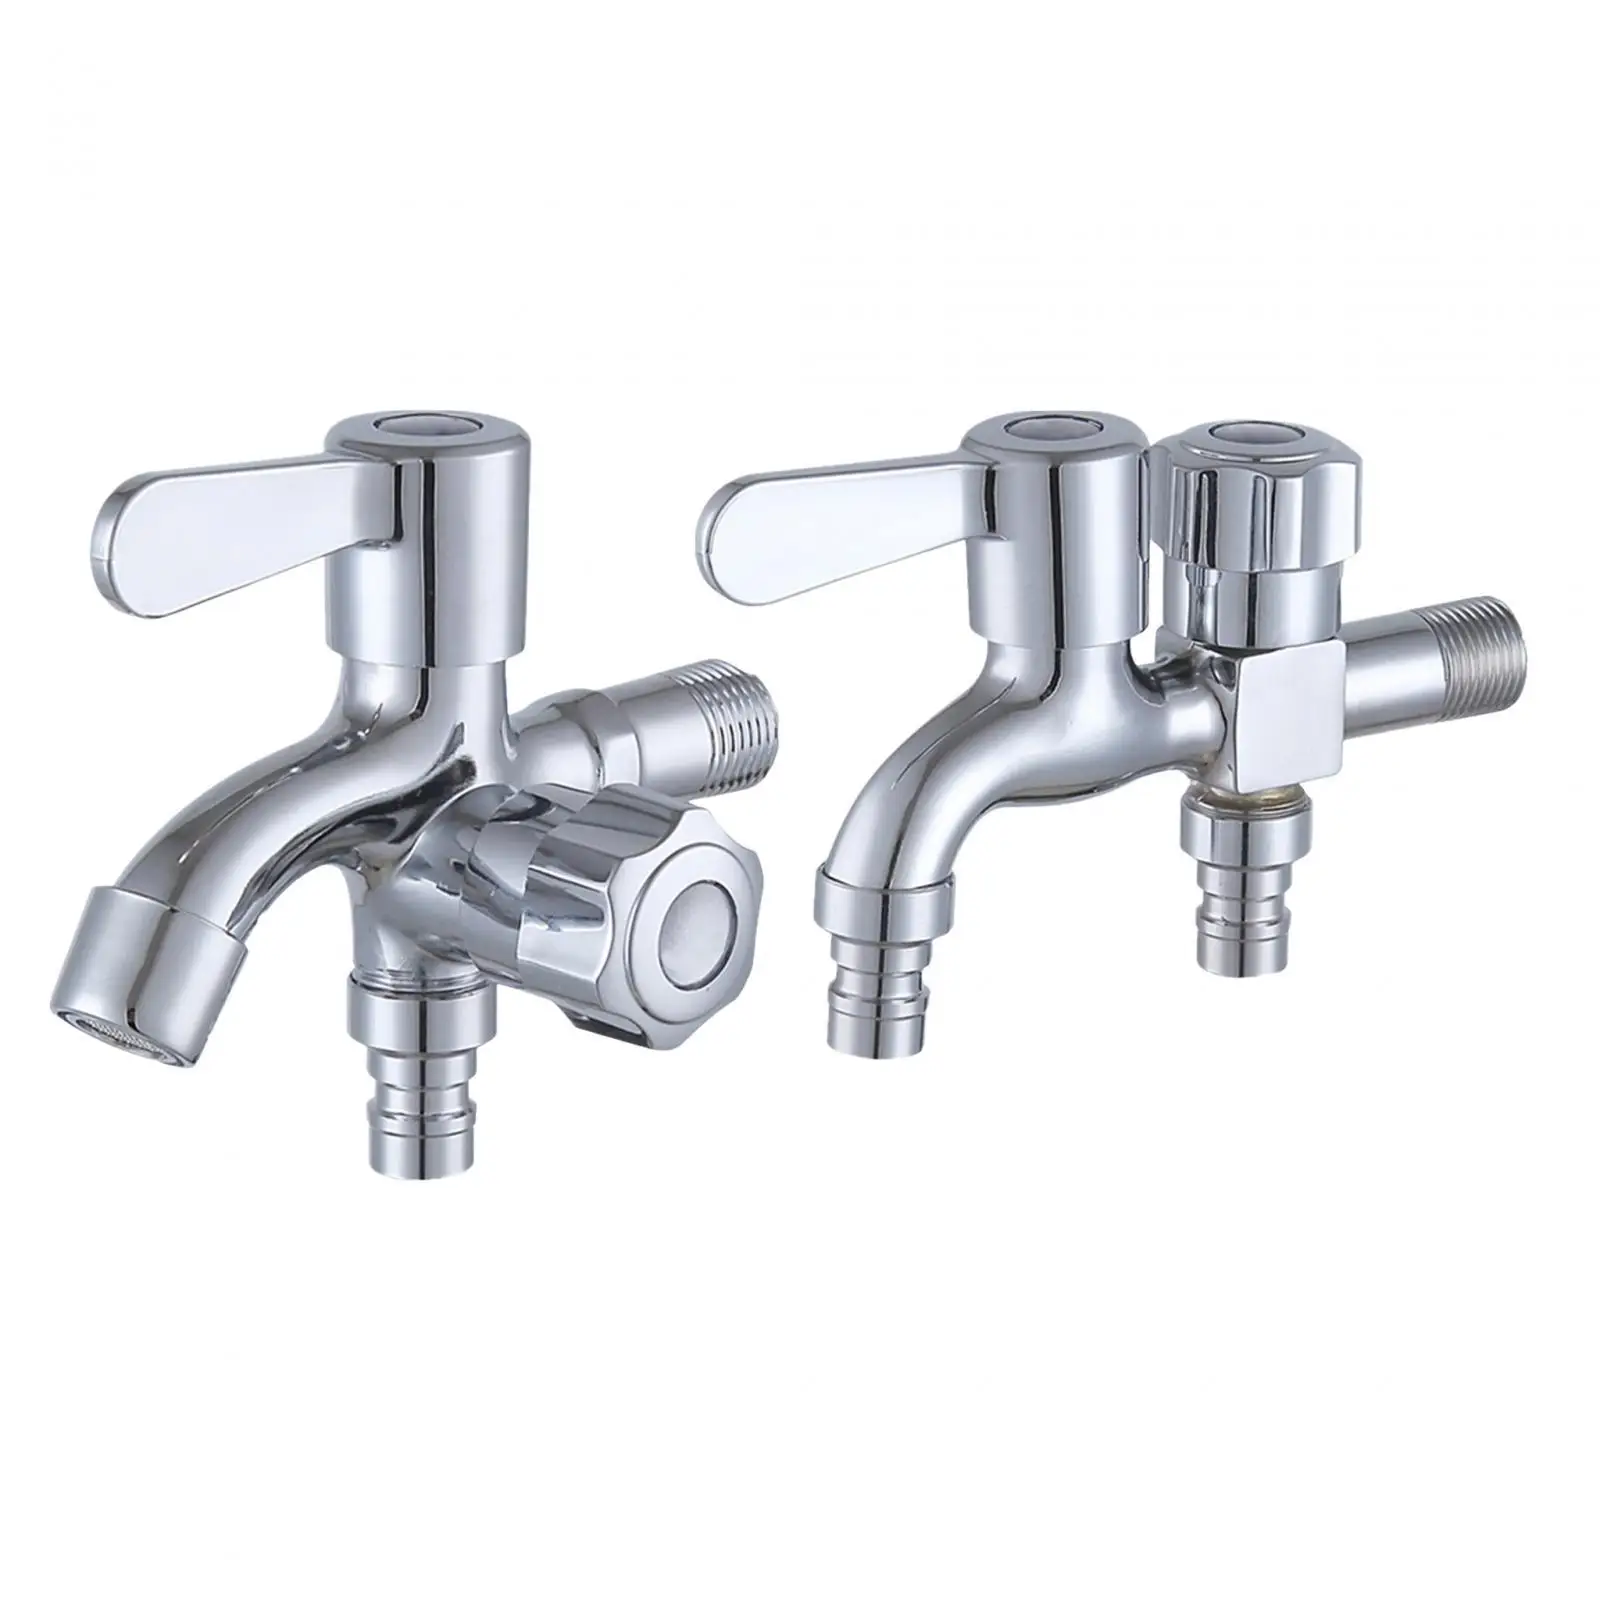 Washing Machine Water Faucet Wal Mounted Alloy Sink tap Mop Pool Faucet for Laundry Room Kitchen Sink Washbasin